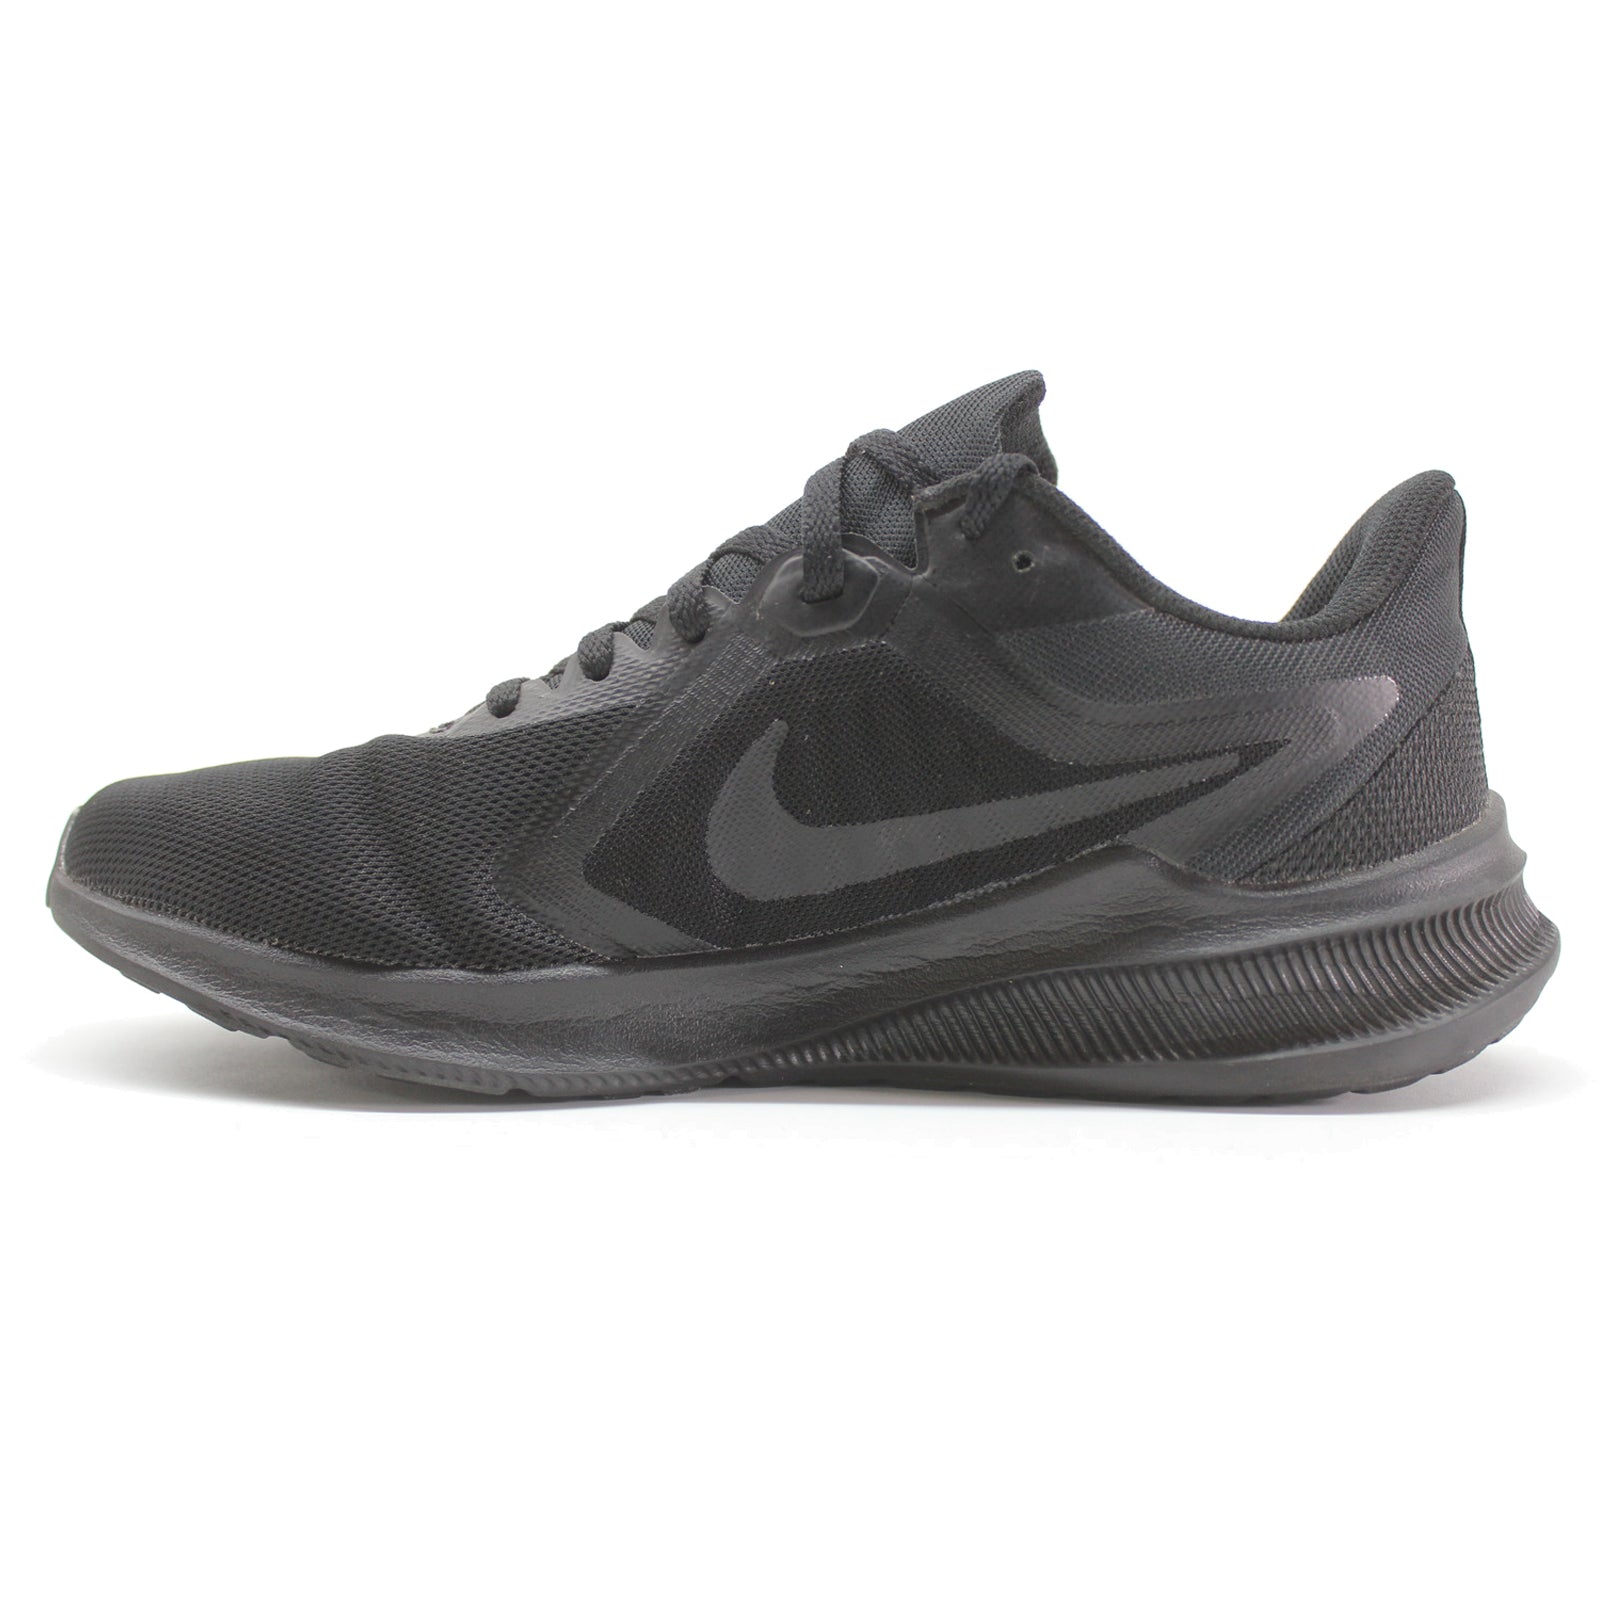 Nike Womens Downshifter 10 Synthetic Black Black Trainers - UK 5.5